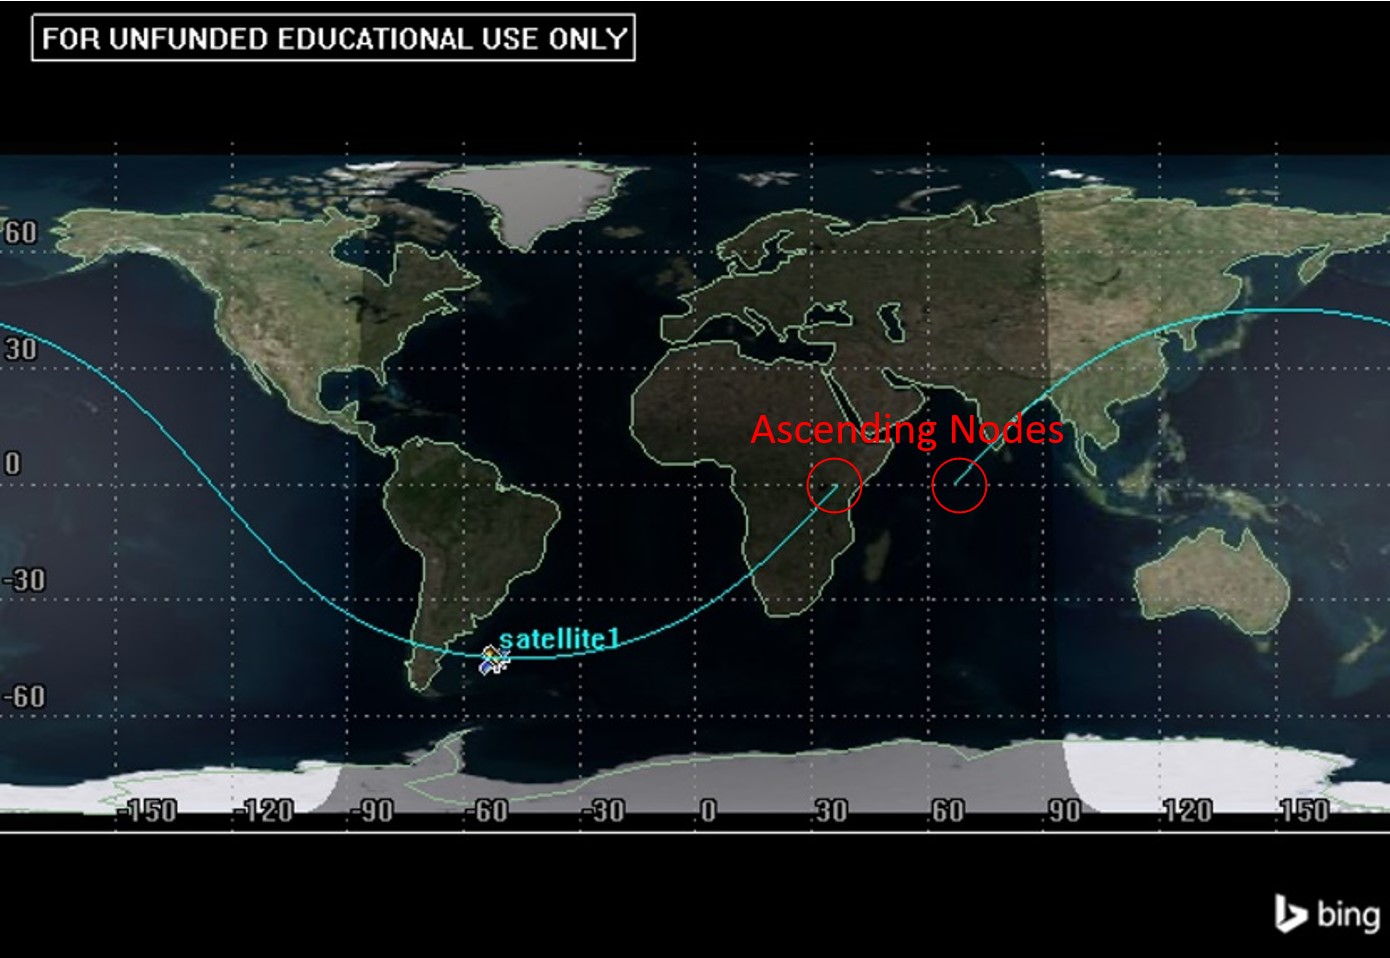 The concept of nodal displacement is introduced as the longitudinal distance between the ascending nodes, which are points where the satellite crosses from the southern hemisphere to the northern hemisphere. The equator serves as a convenient reference for identifying ascending nodes on a ground track. In the provided figure, the two ascending nodes are highlighted with red circles. The gap between them is a consequence of Earth's rotation, and it's noted that on a non-rotating Earth, there would be only one ascending node.